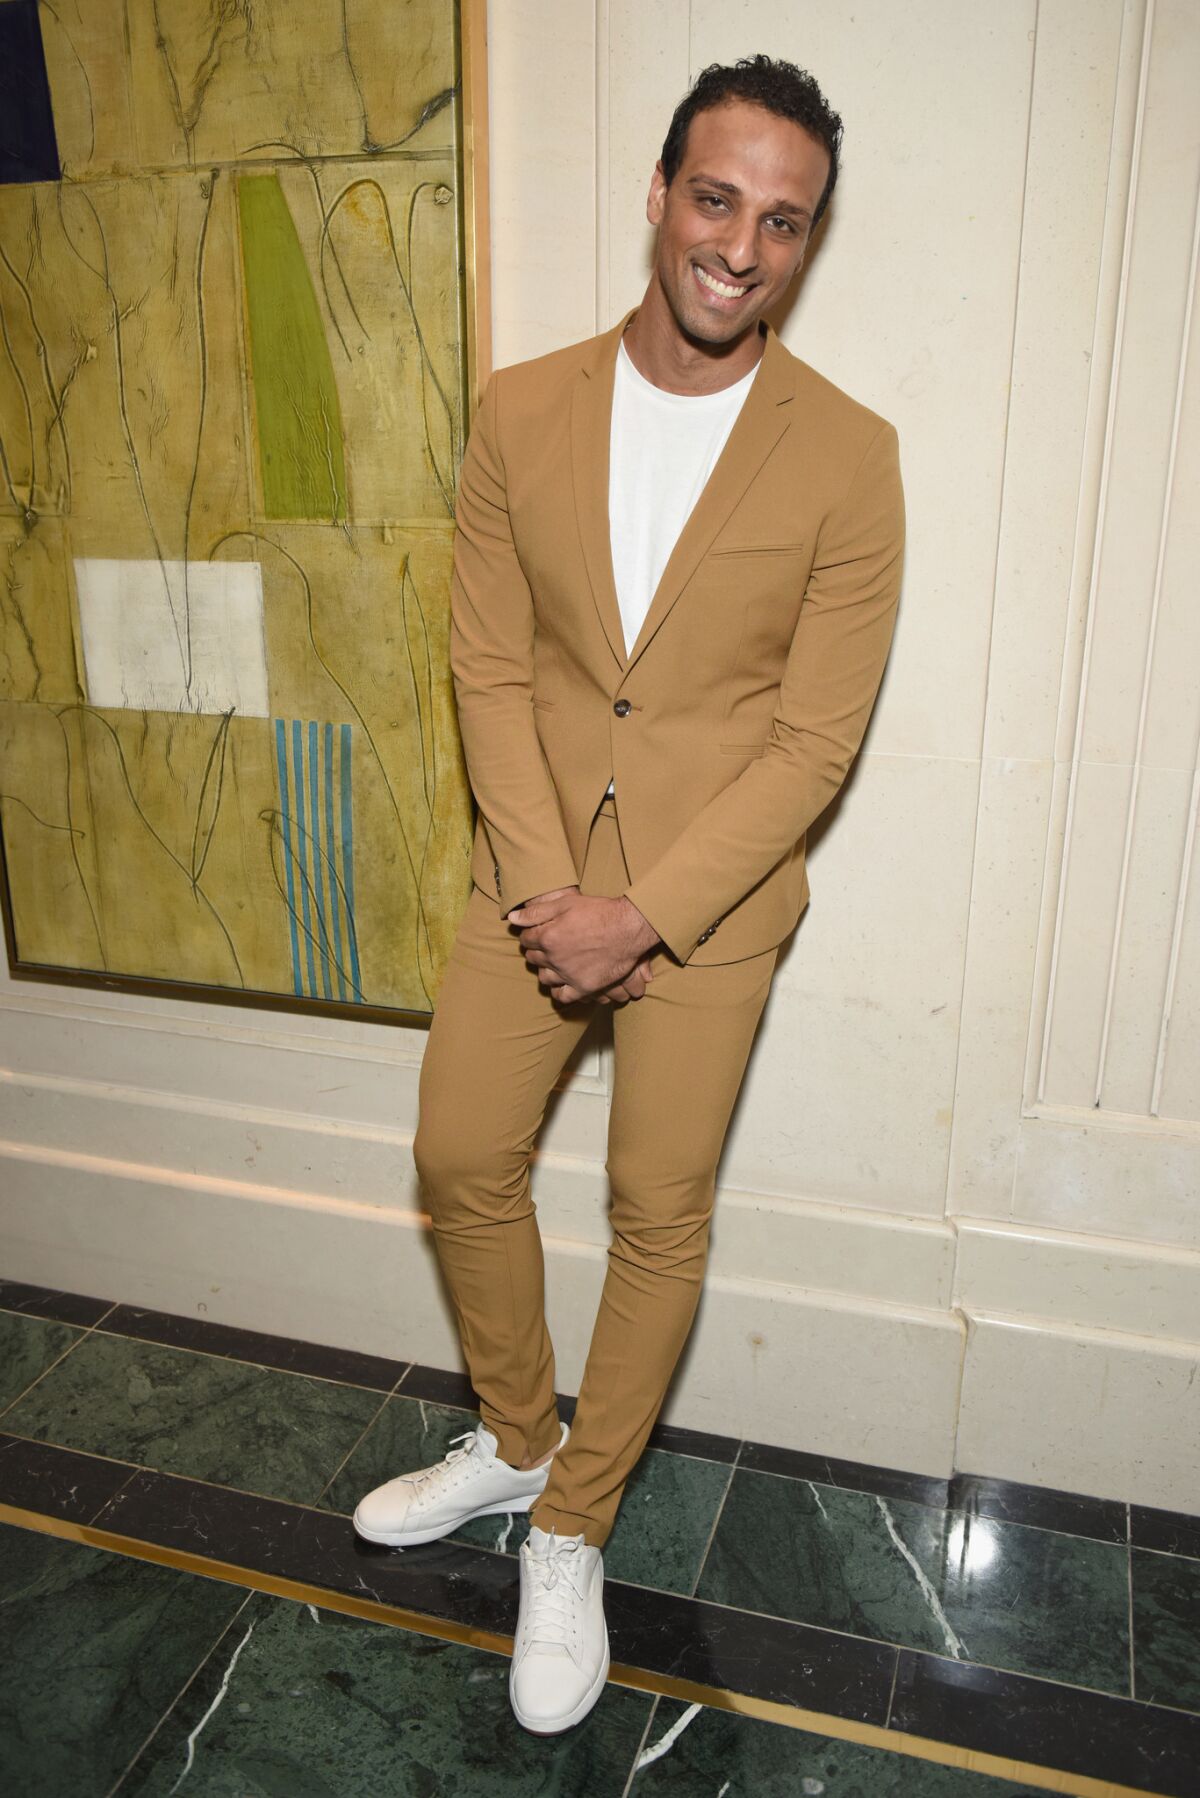 Ari'el Stachel at the Tony Honors Cocktail Party at Sofitel Hotel on June 4, 2018 in New York City.